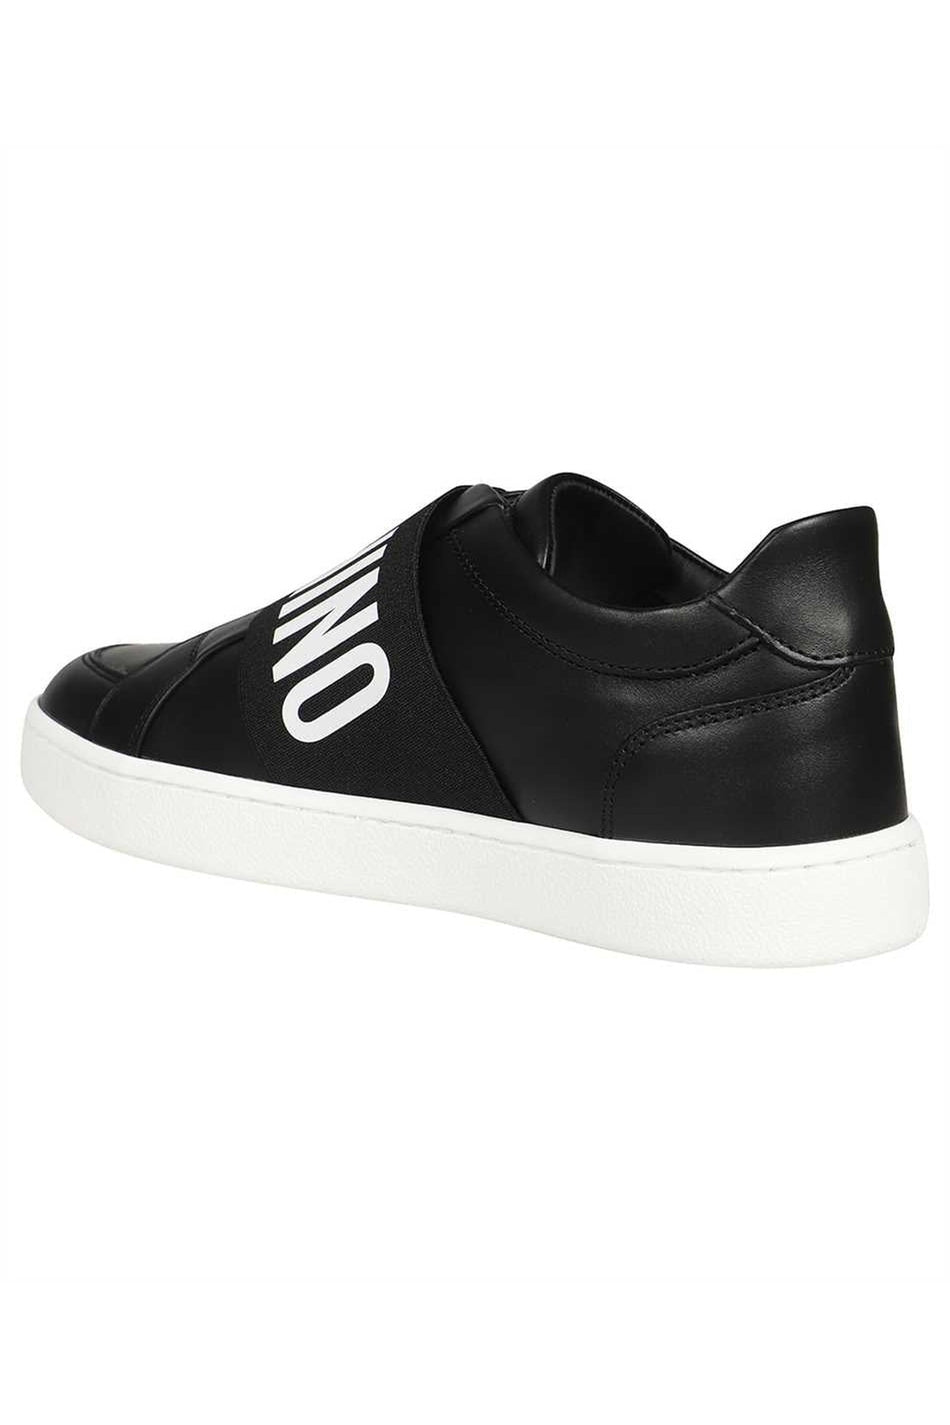 Logo detail leather sneakers-Moschino-OUTLET-SALE-ARCHIVIST